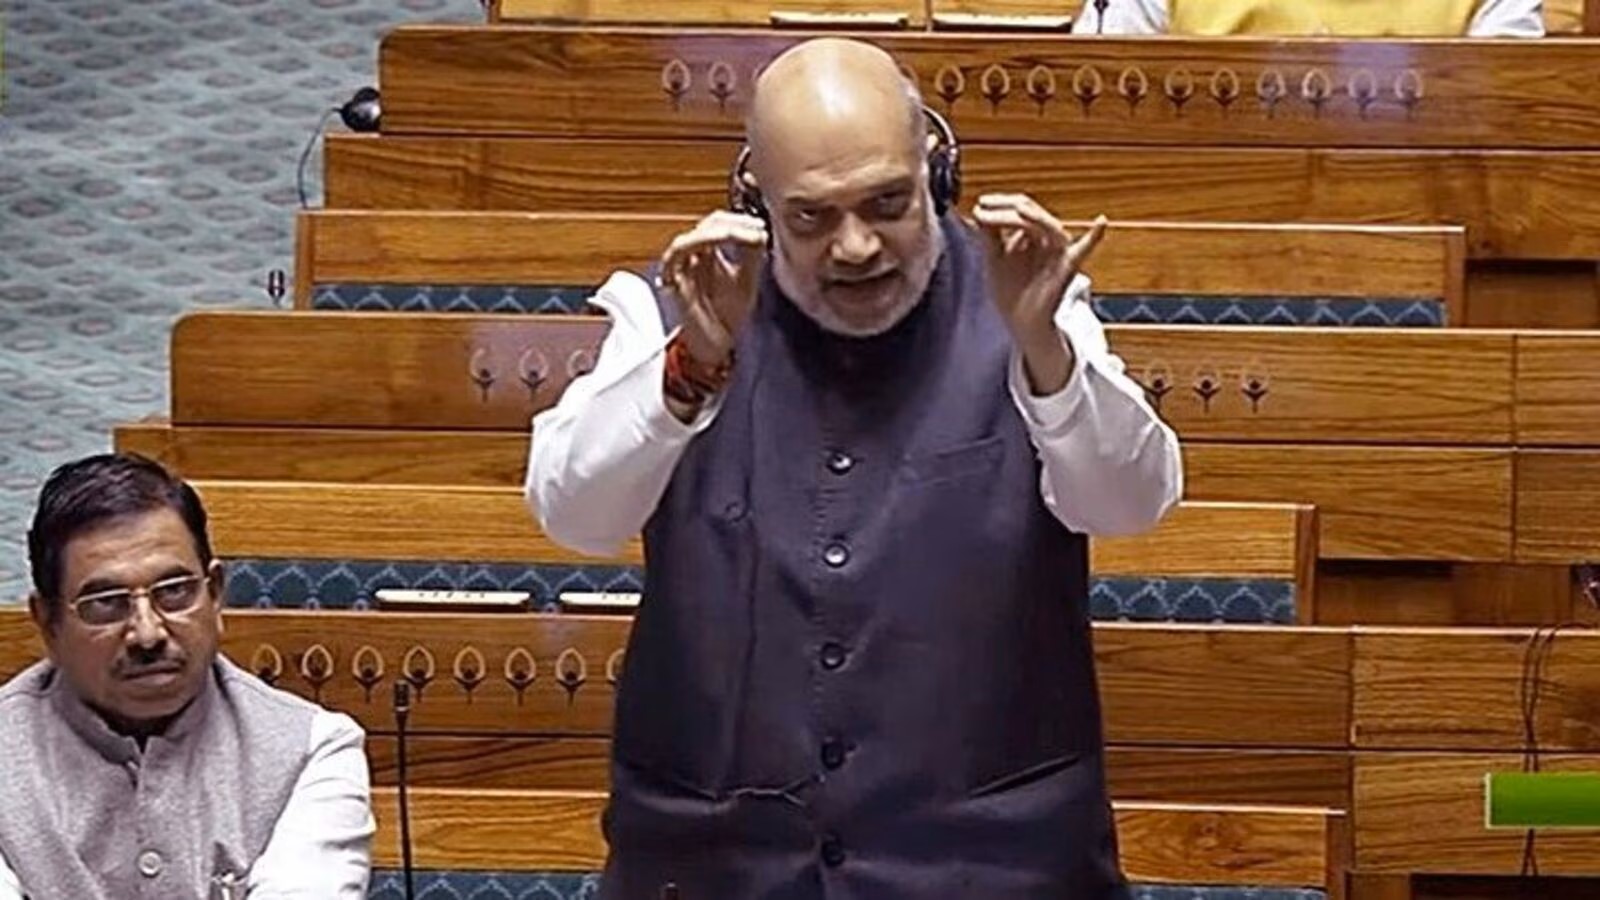 Home minister Amit Shah in the parliament says, "Nehru was responsible....otherwise PoK would have been part of India)